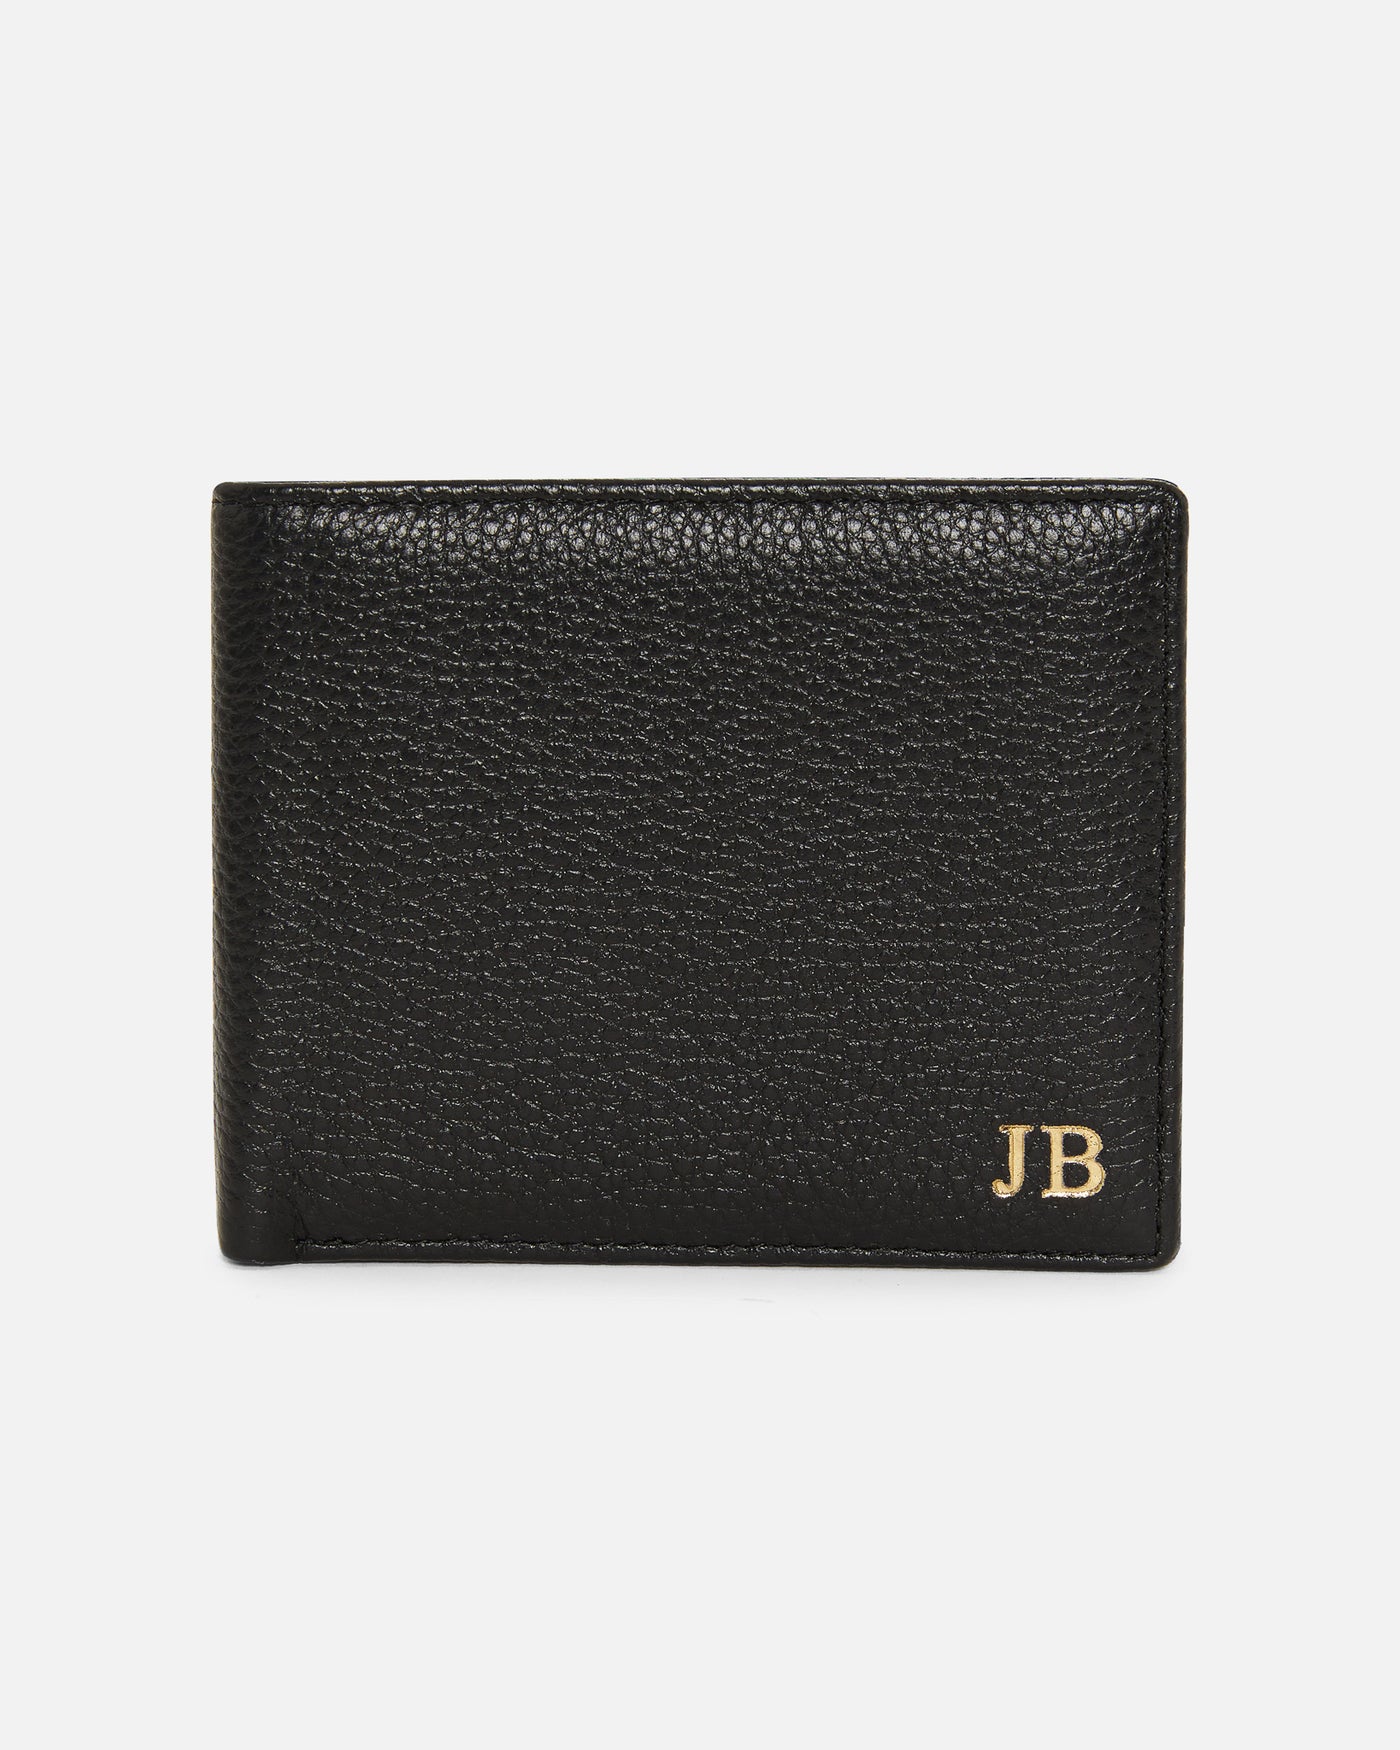 black pebble leather wallet embossed with gold initials